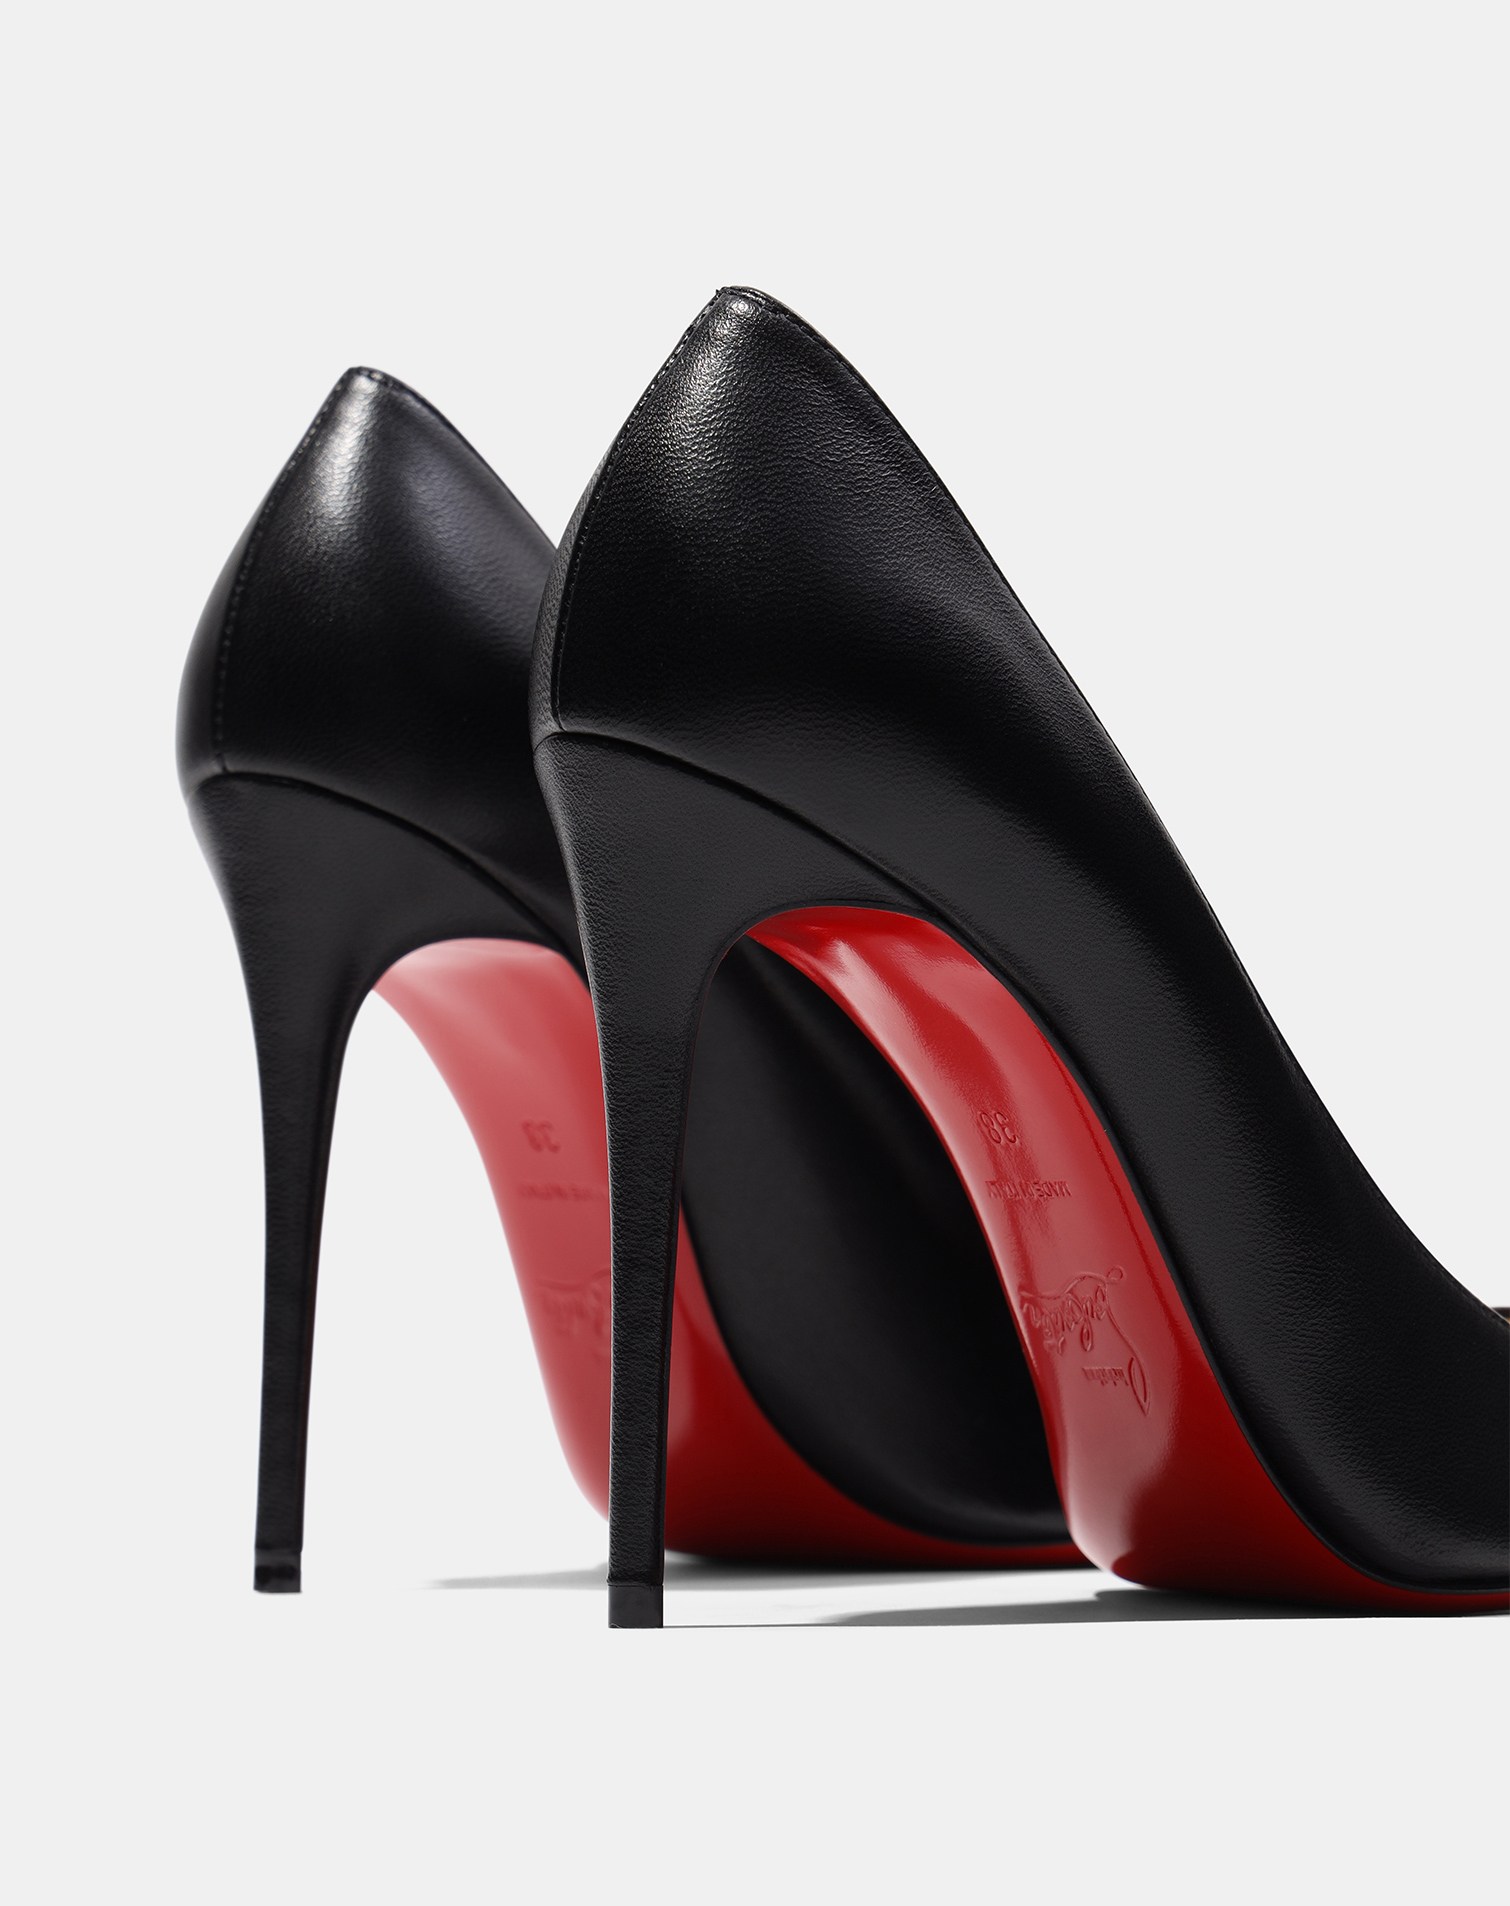 Essential guide to Christian Louboutin's So Kate high heels - High heels  daily